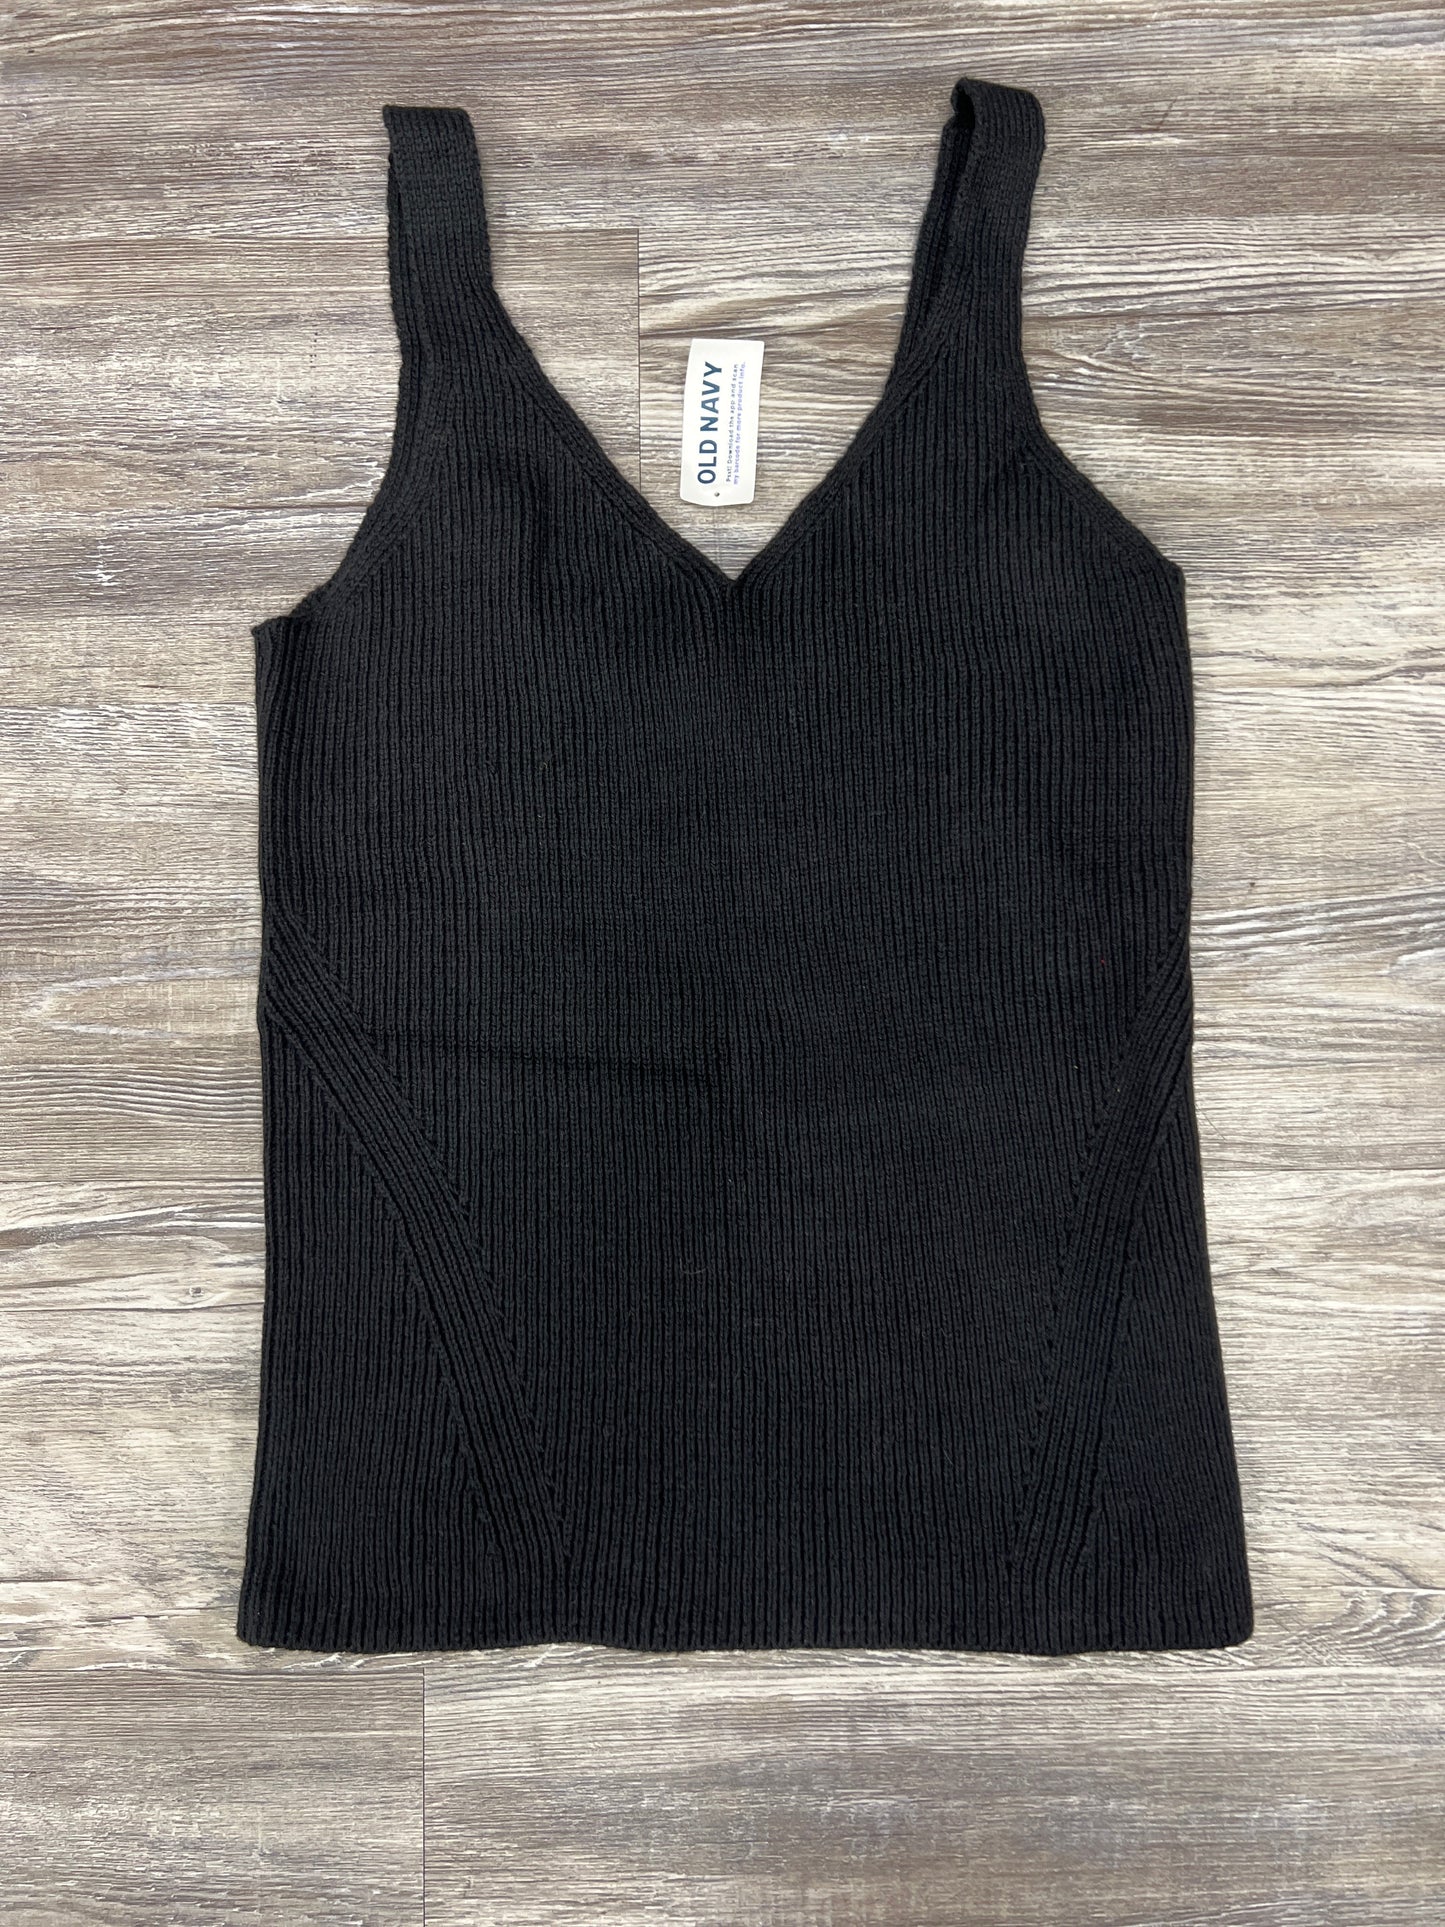 Top Sleeveless By Old Navy Size: S Tall